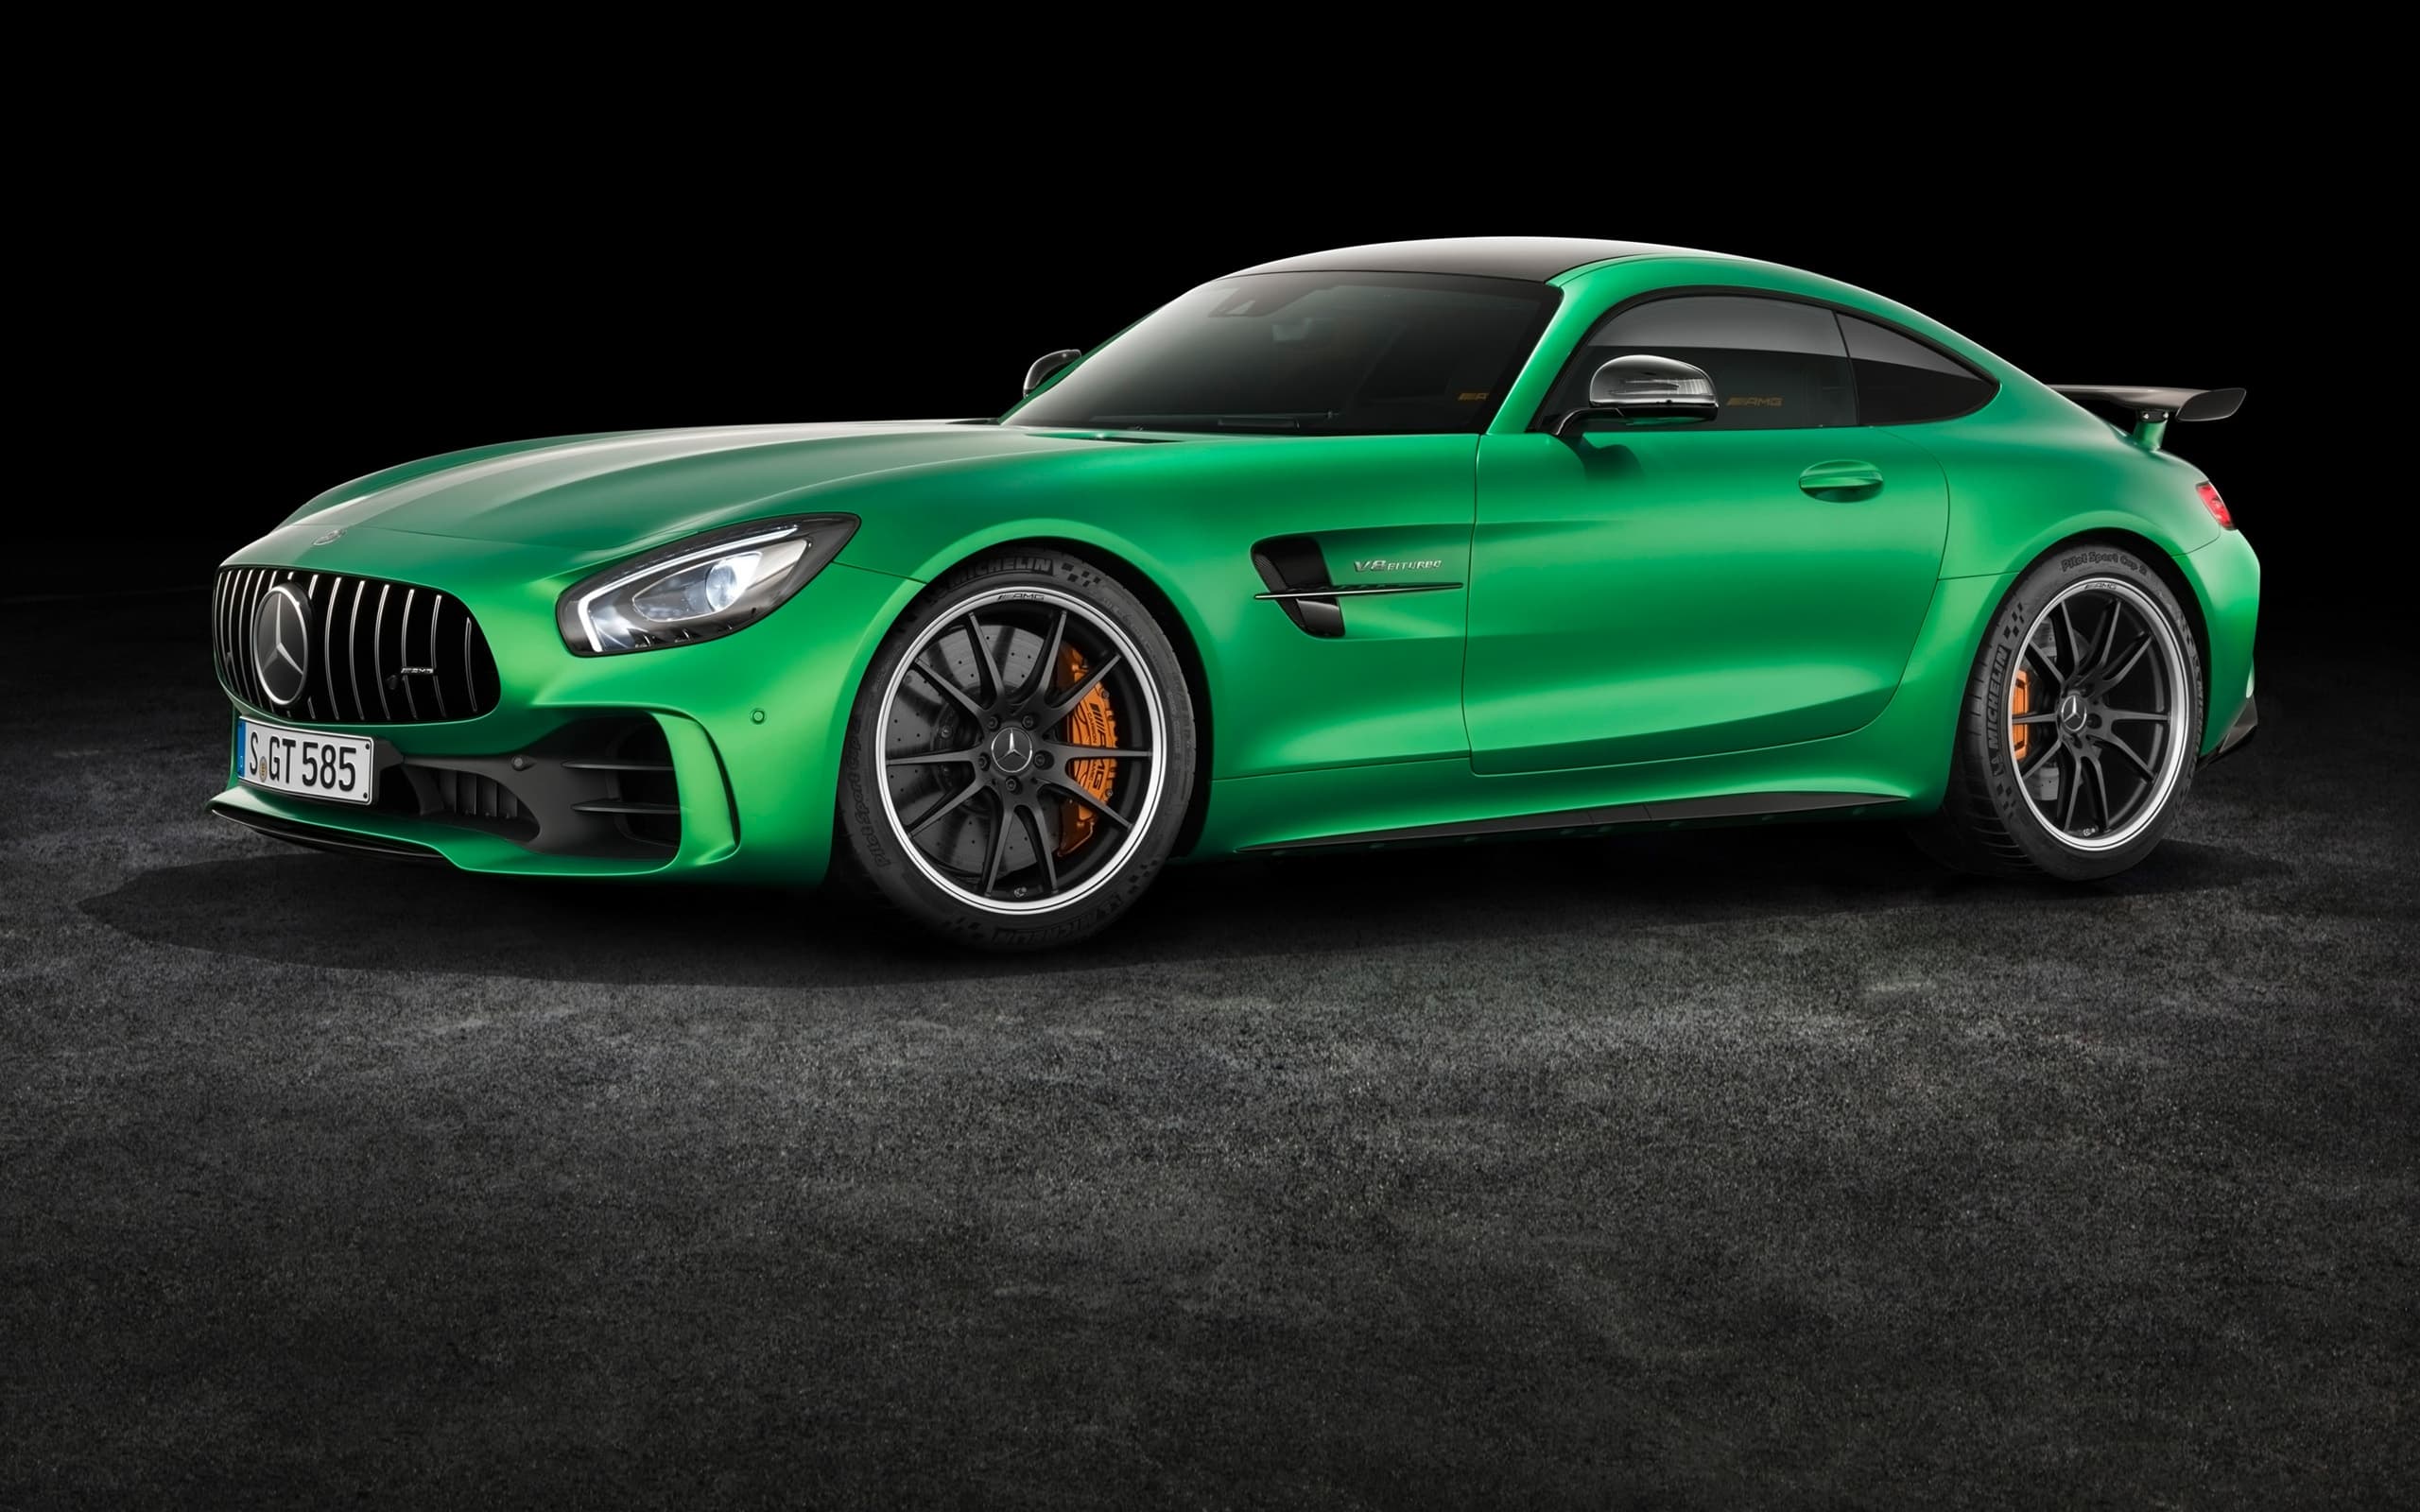 Mercedes Amg Gt R Wallpapers Wallpaper Cave Images, Photos, Reviews